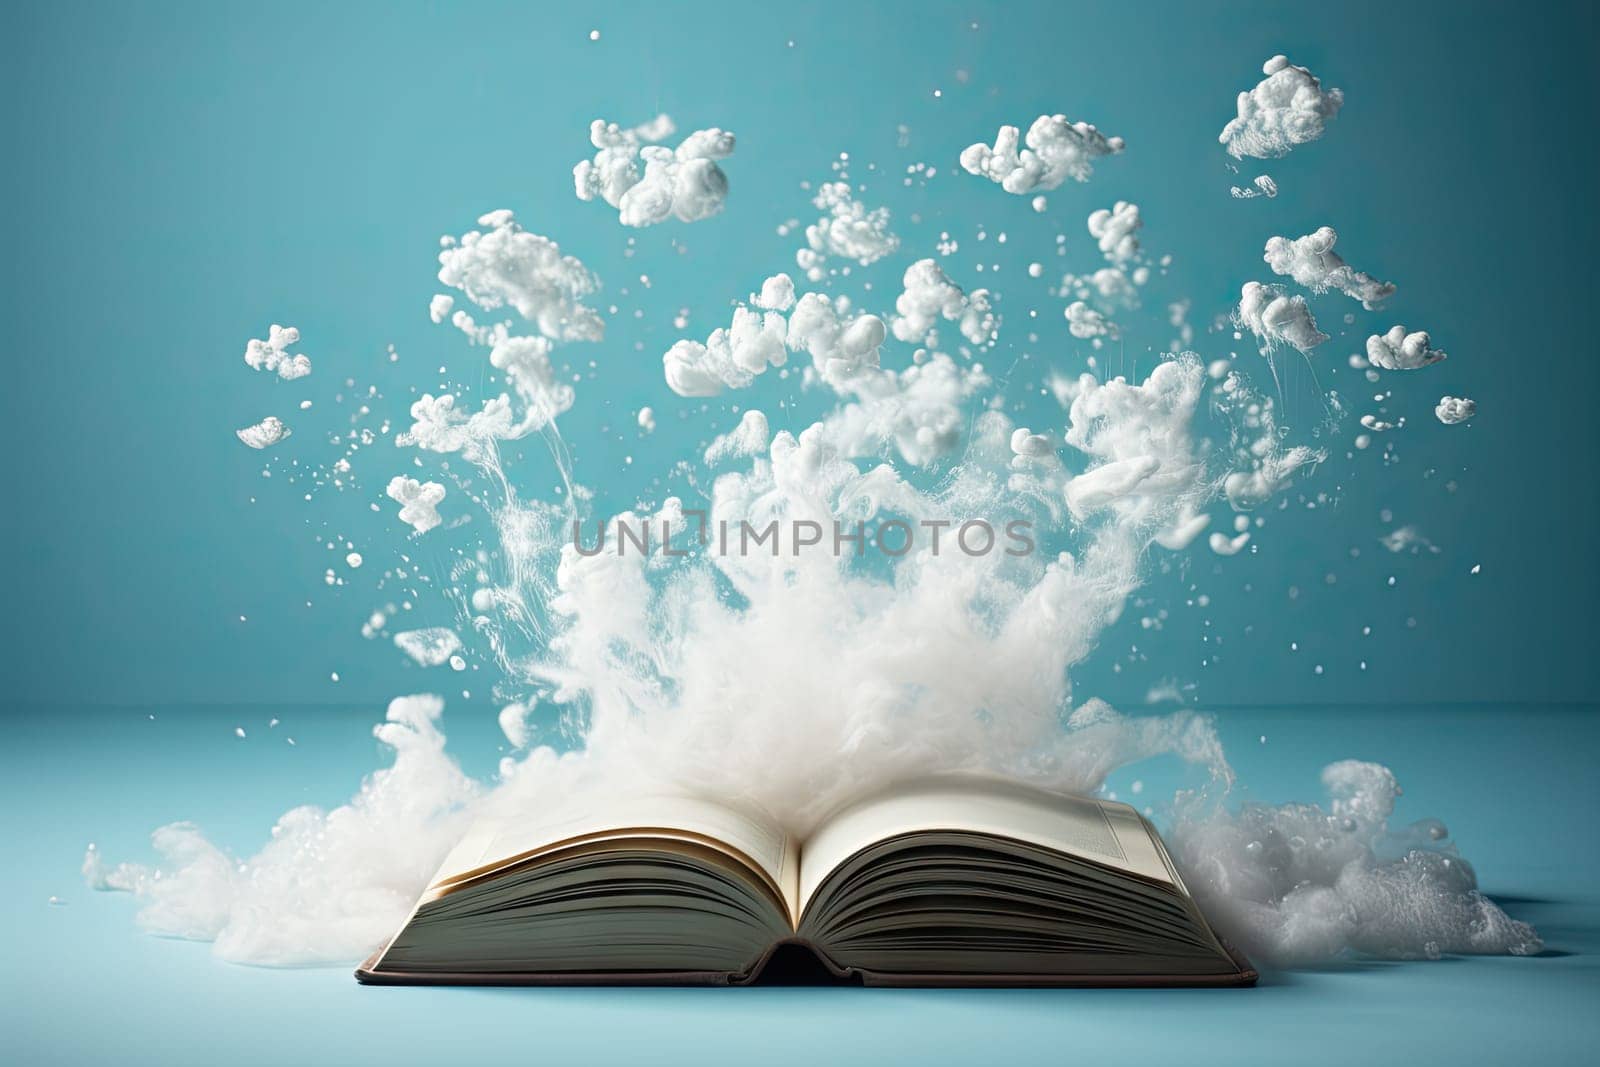 A Story Unfolding: An Open Book Drenched in a Delightful Splash of Milk